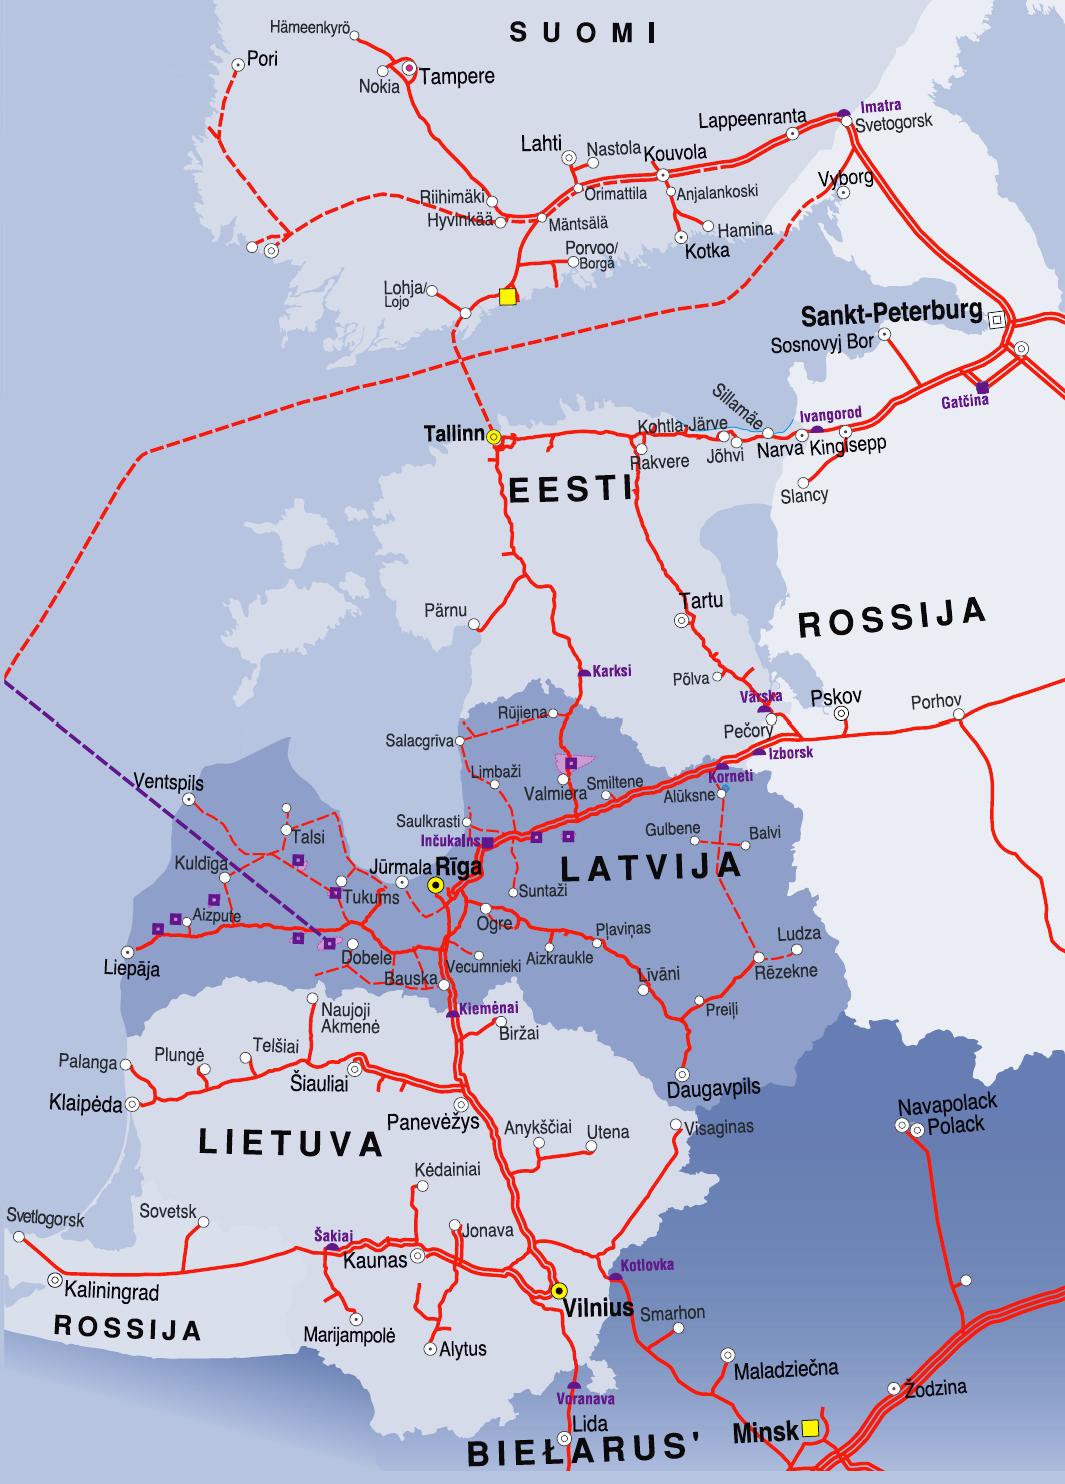 Gas pipelines of the Baltic States and Finland